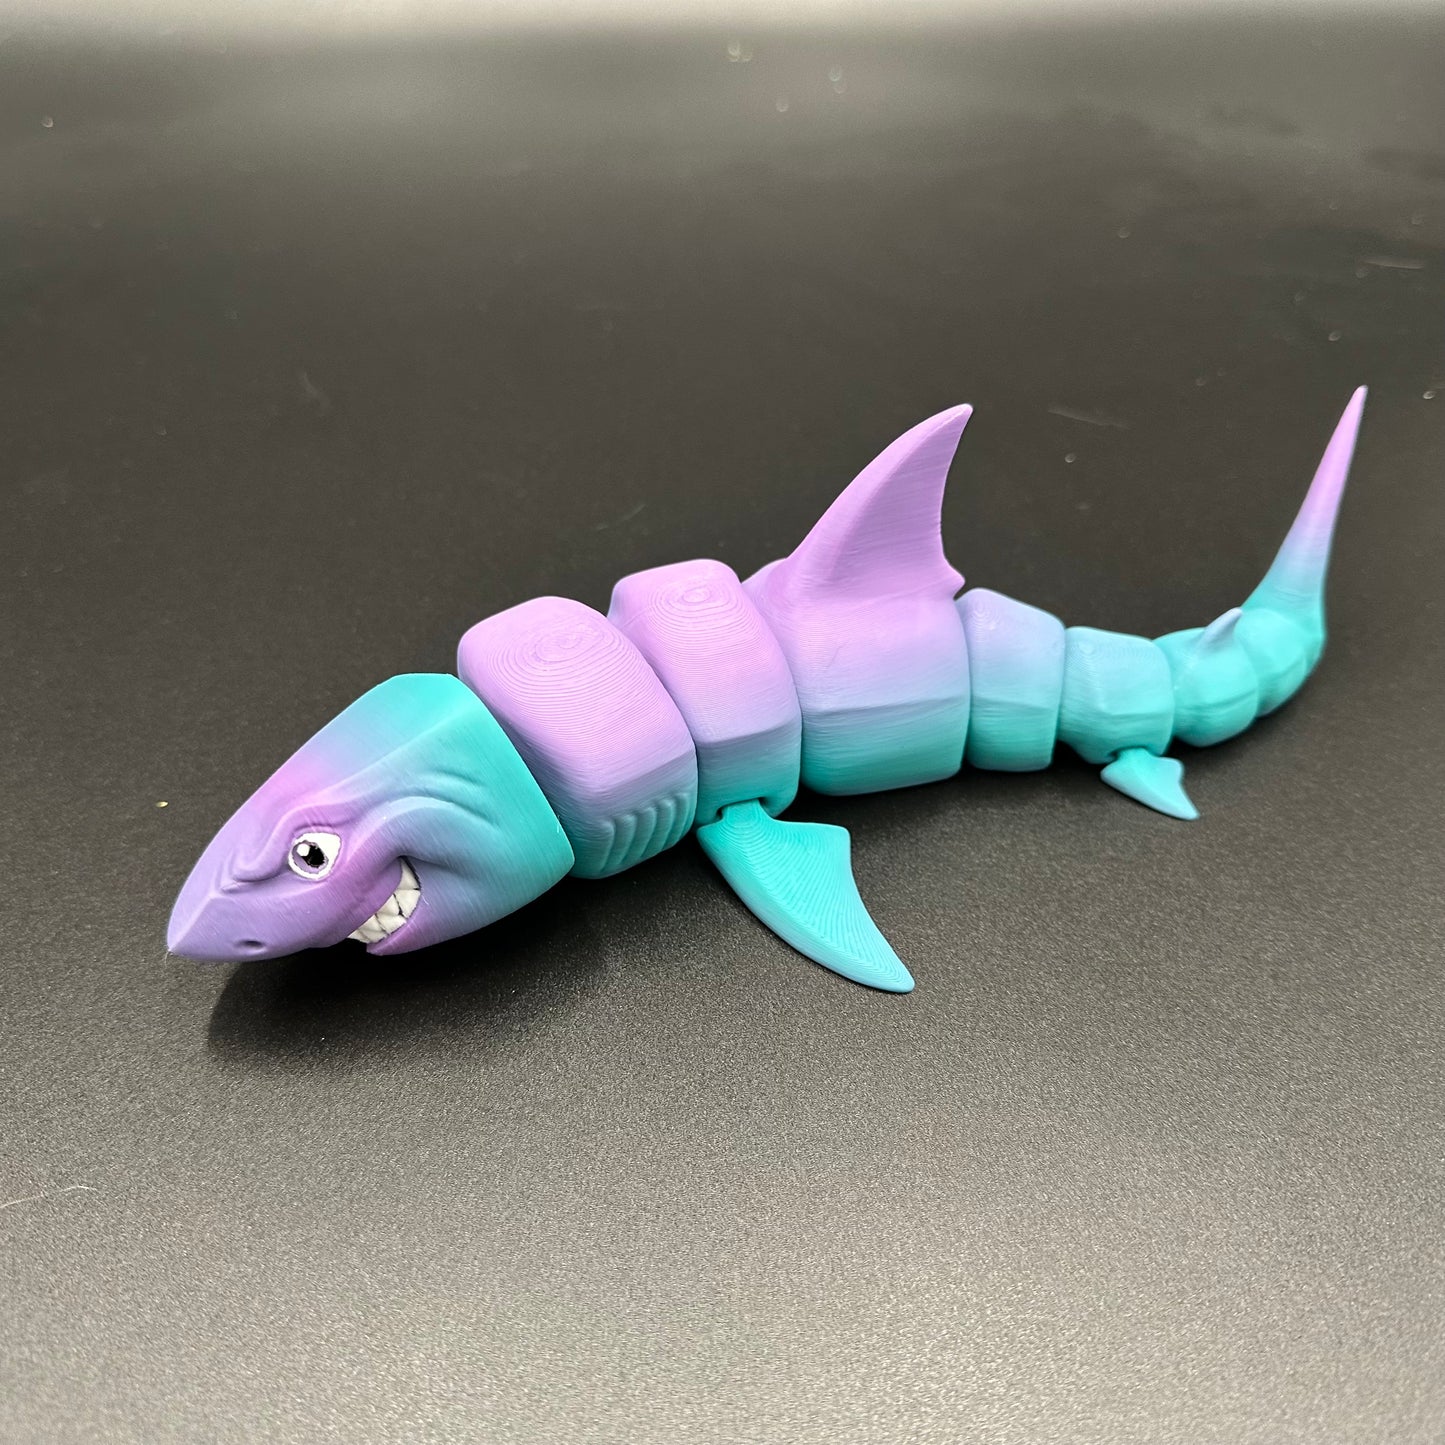 3D printed Multicolored Great White Shark.